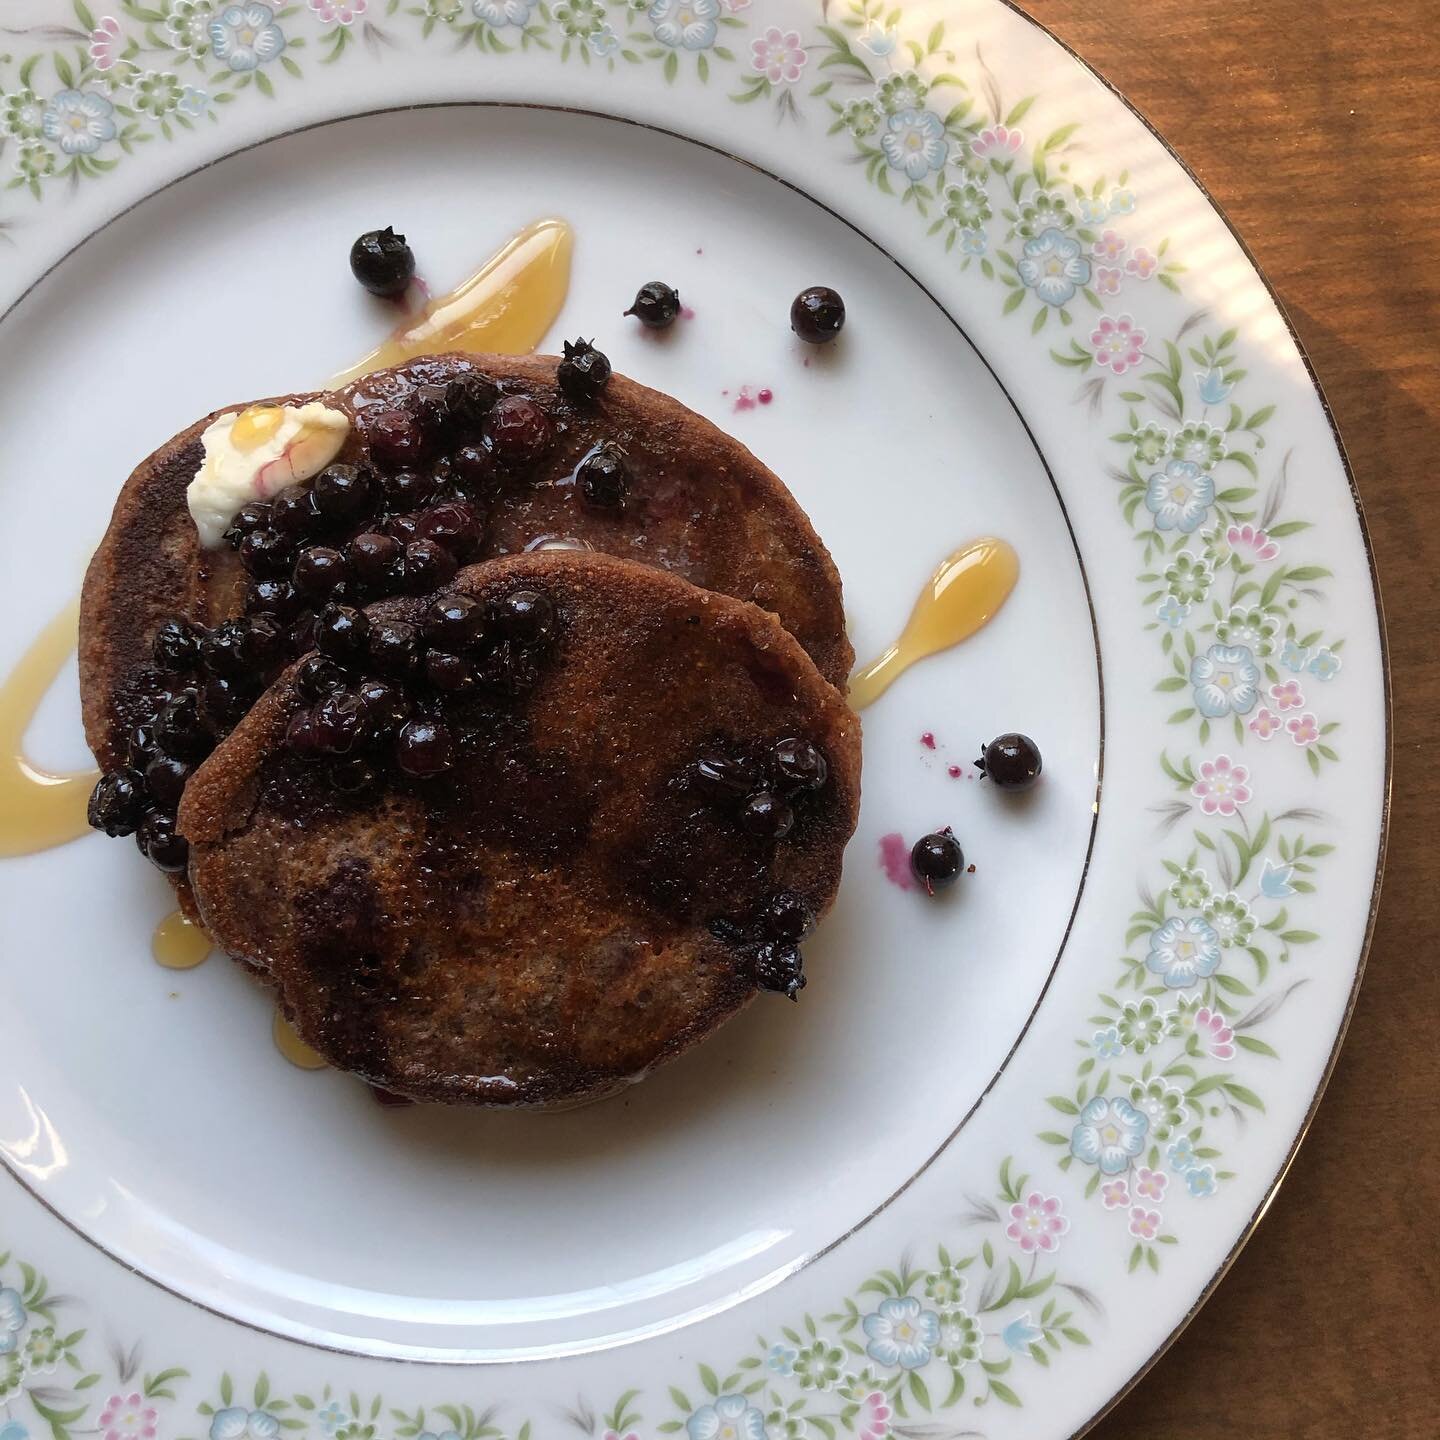 Cooking up our favorite maple syrup delivery system... pancakes made from @mistybrookfarmme rye flour and cold leached acorn flour. Topped with wild blueberries, butter and our freshly made syrup.